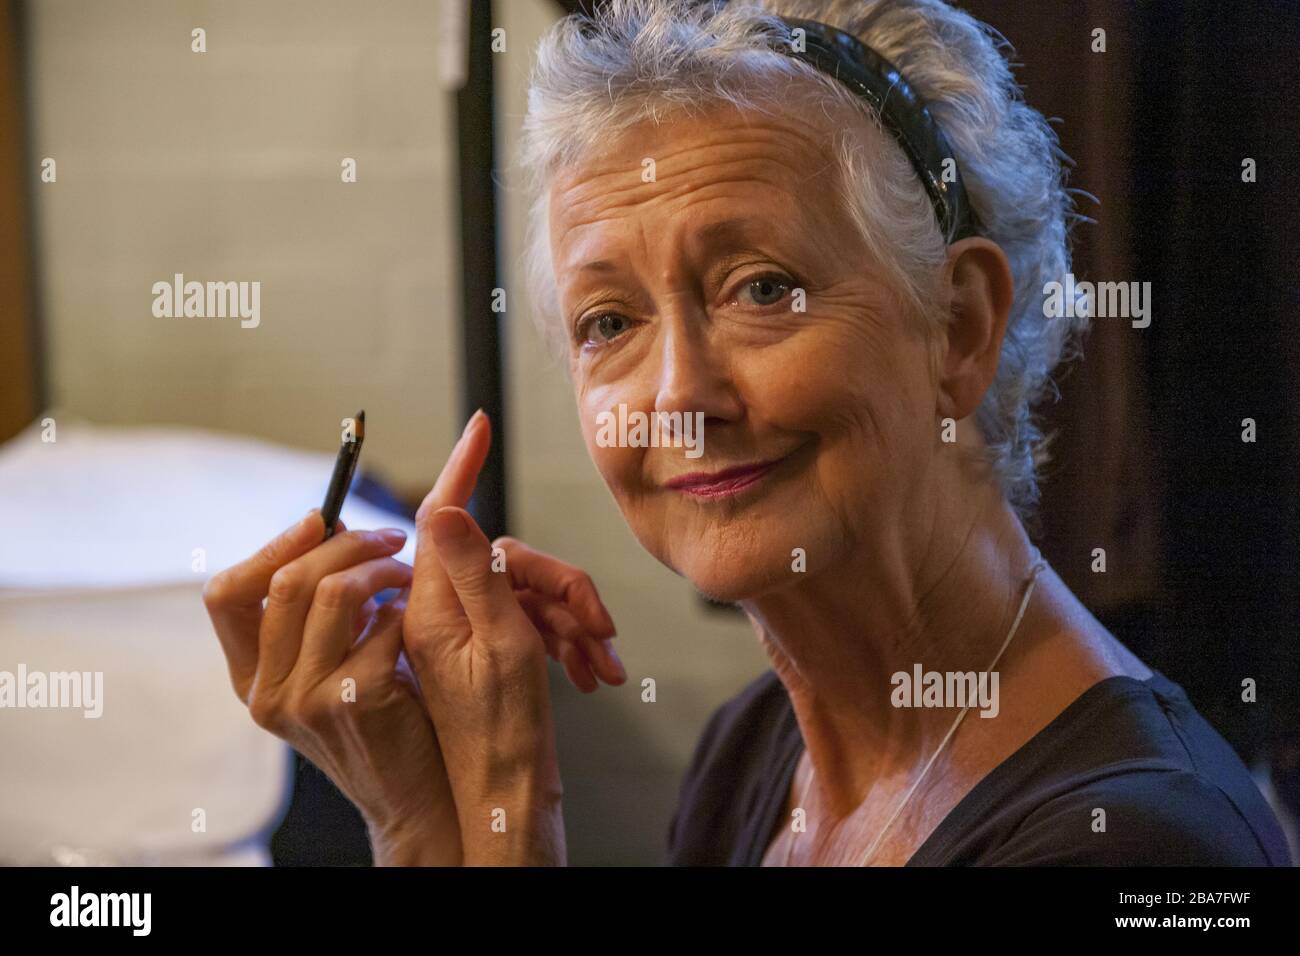 LONDON, UNITED KINGDOM - Sep 13, 2013: Susan Sheridan makes up as Trillian for The Hitchhiker's Guide to the Galaxy Radio Show Live Stock Photo